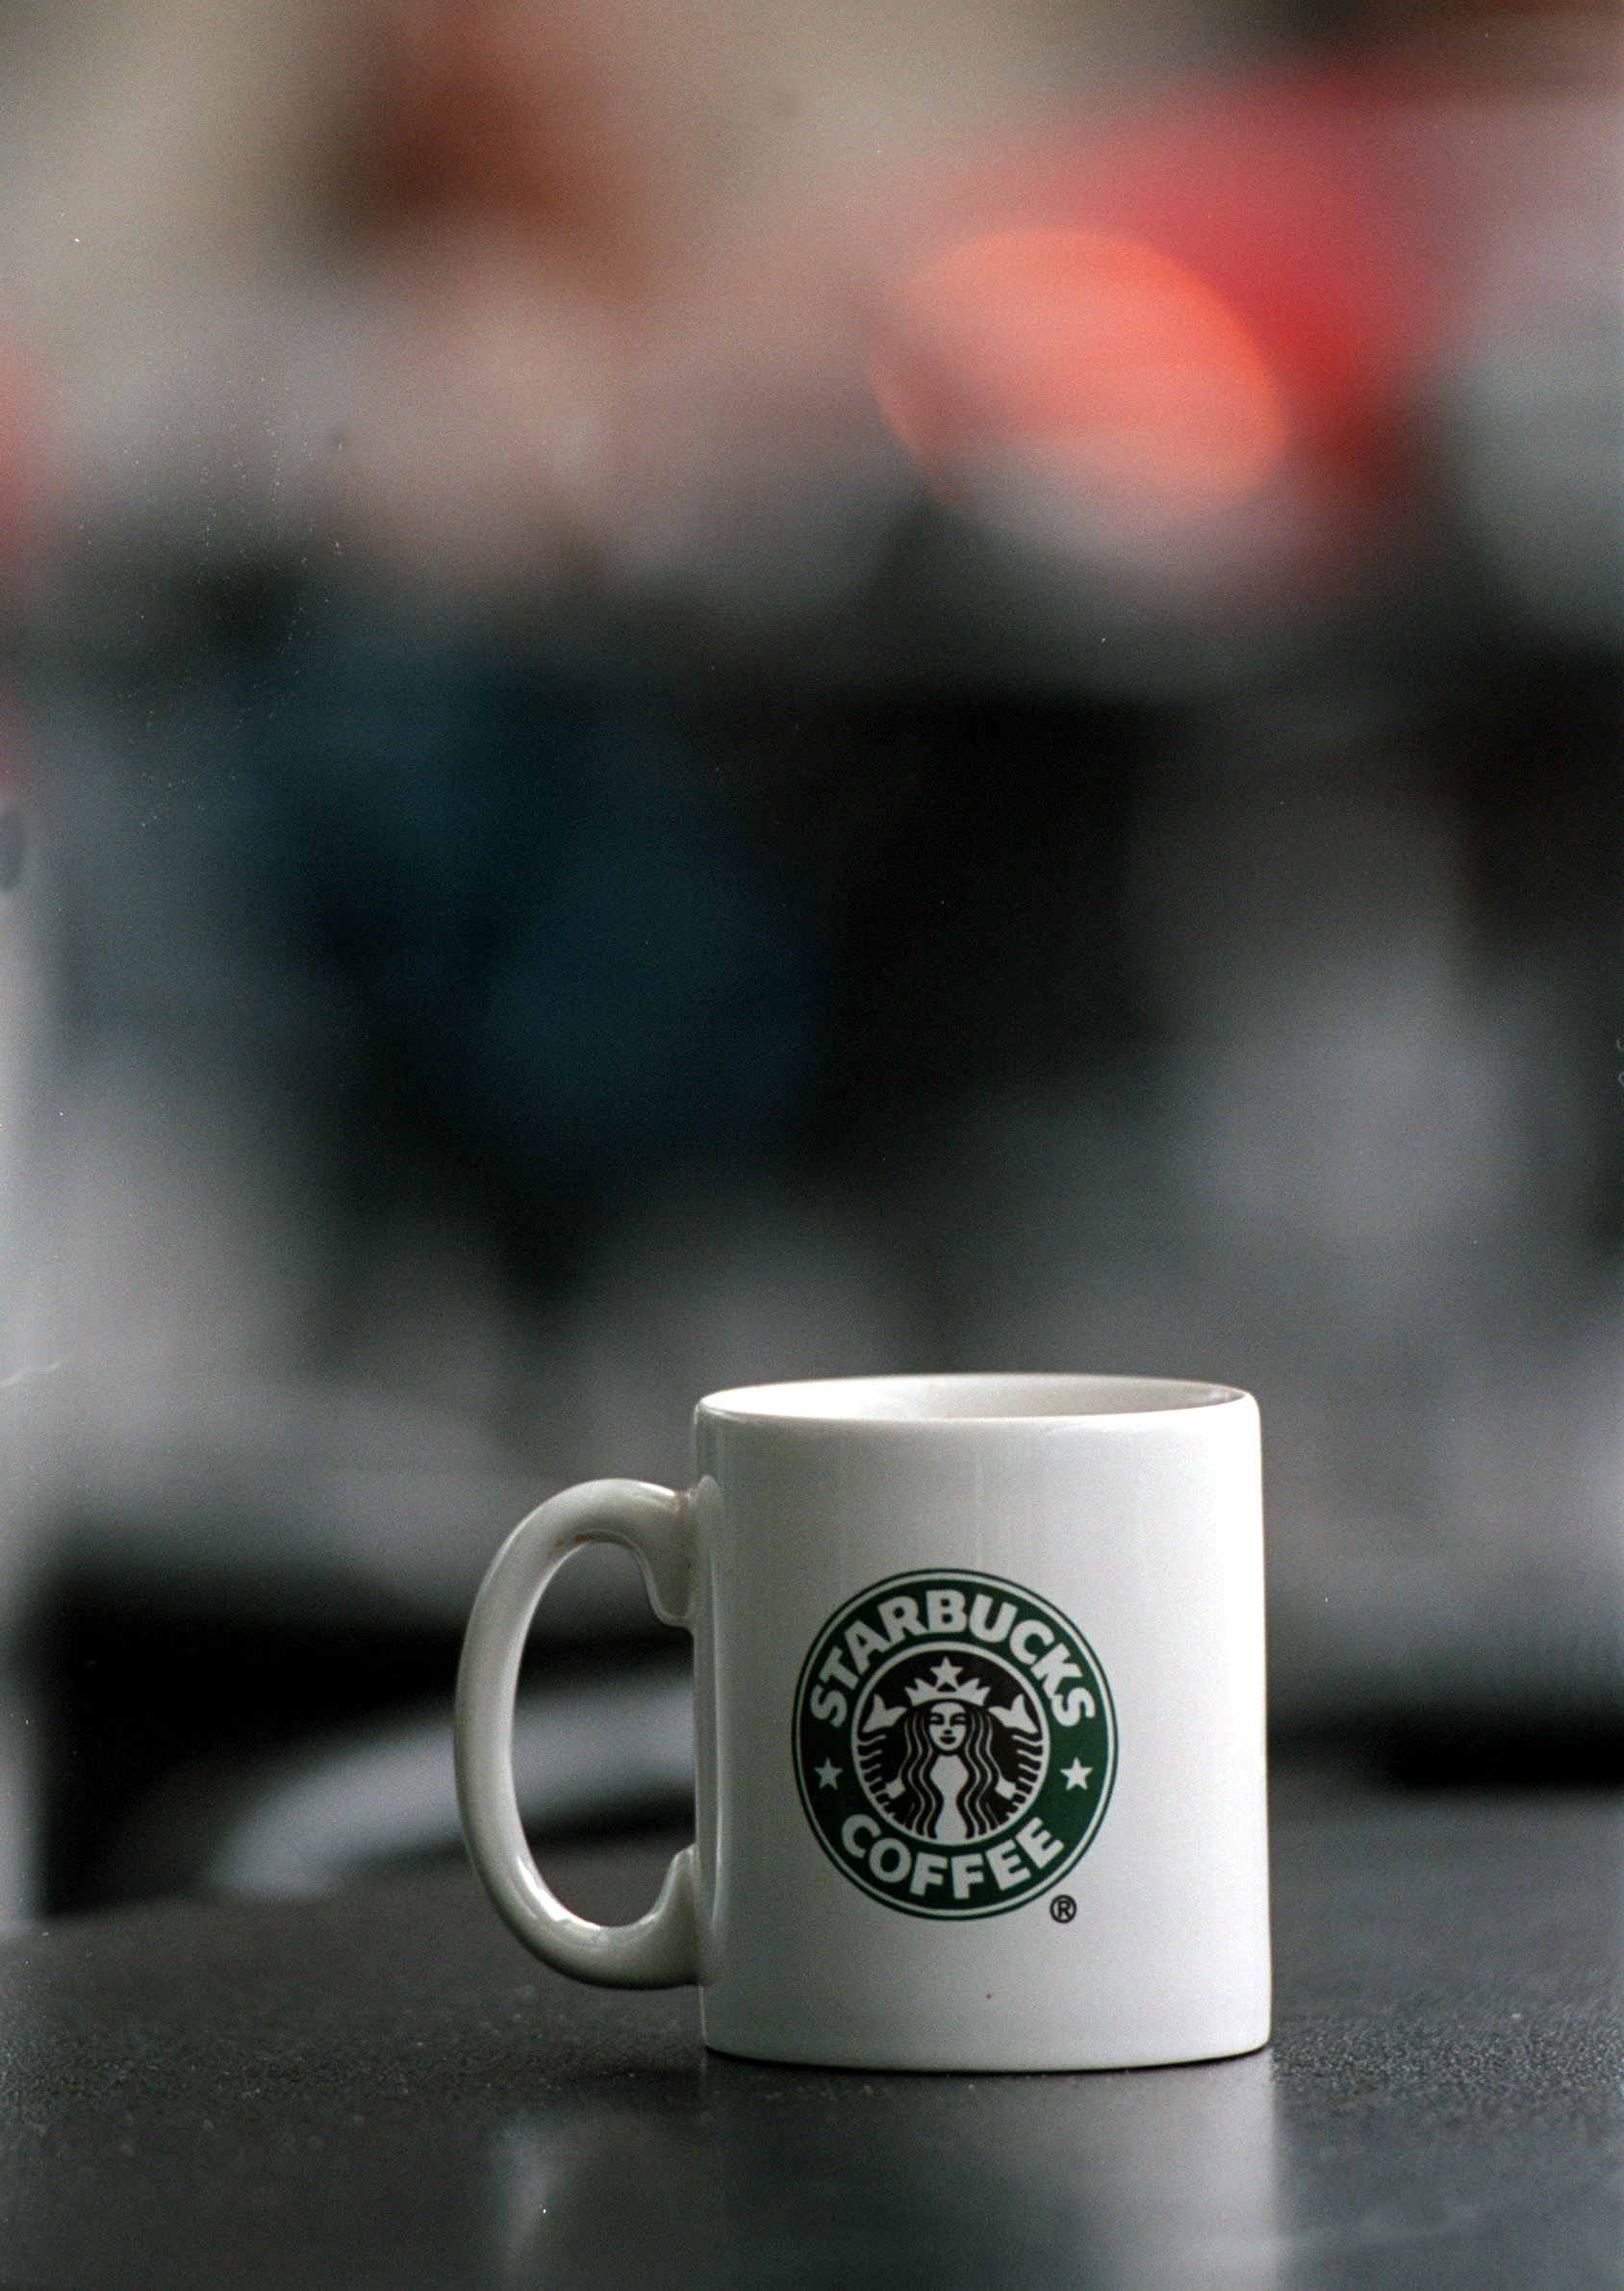 Starbucks mugs and tumblers are in hot demand from bargain hunters